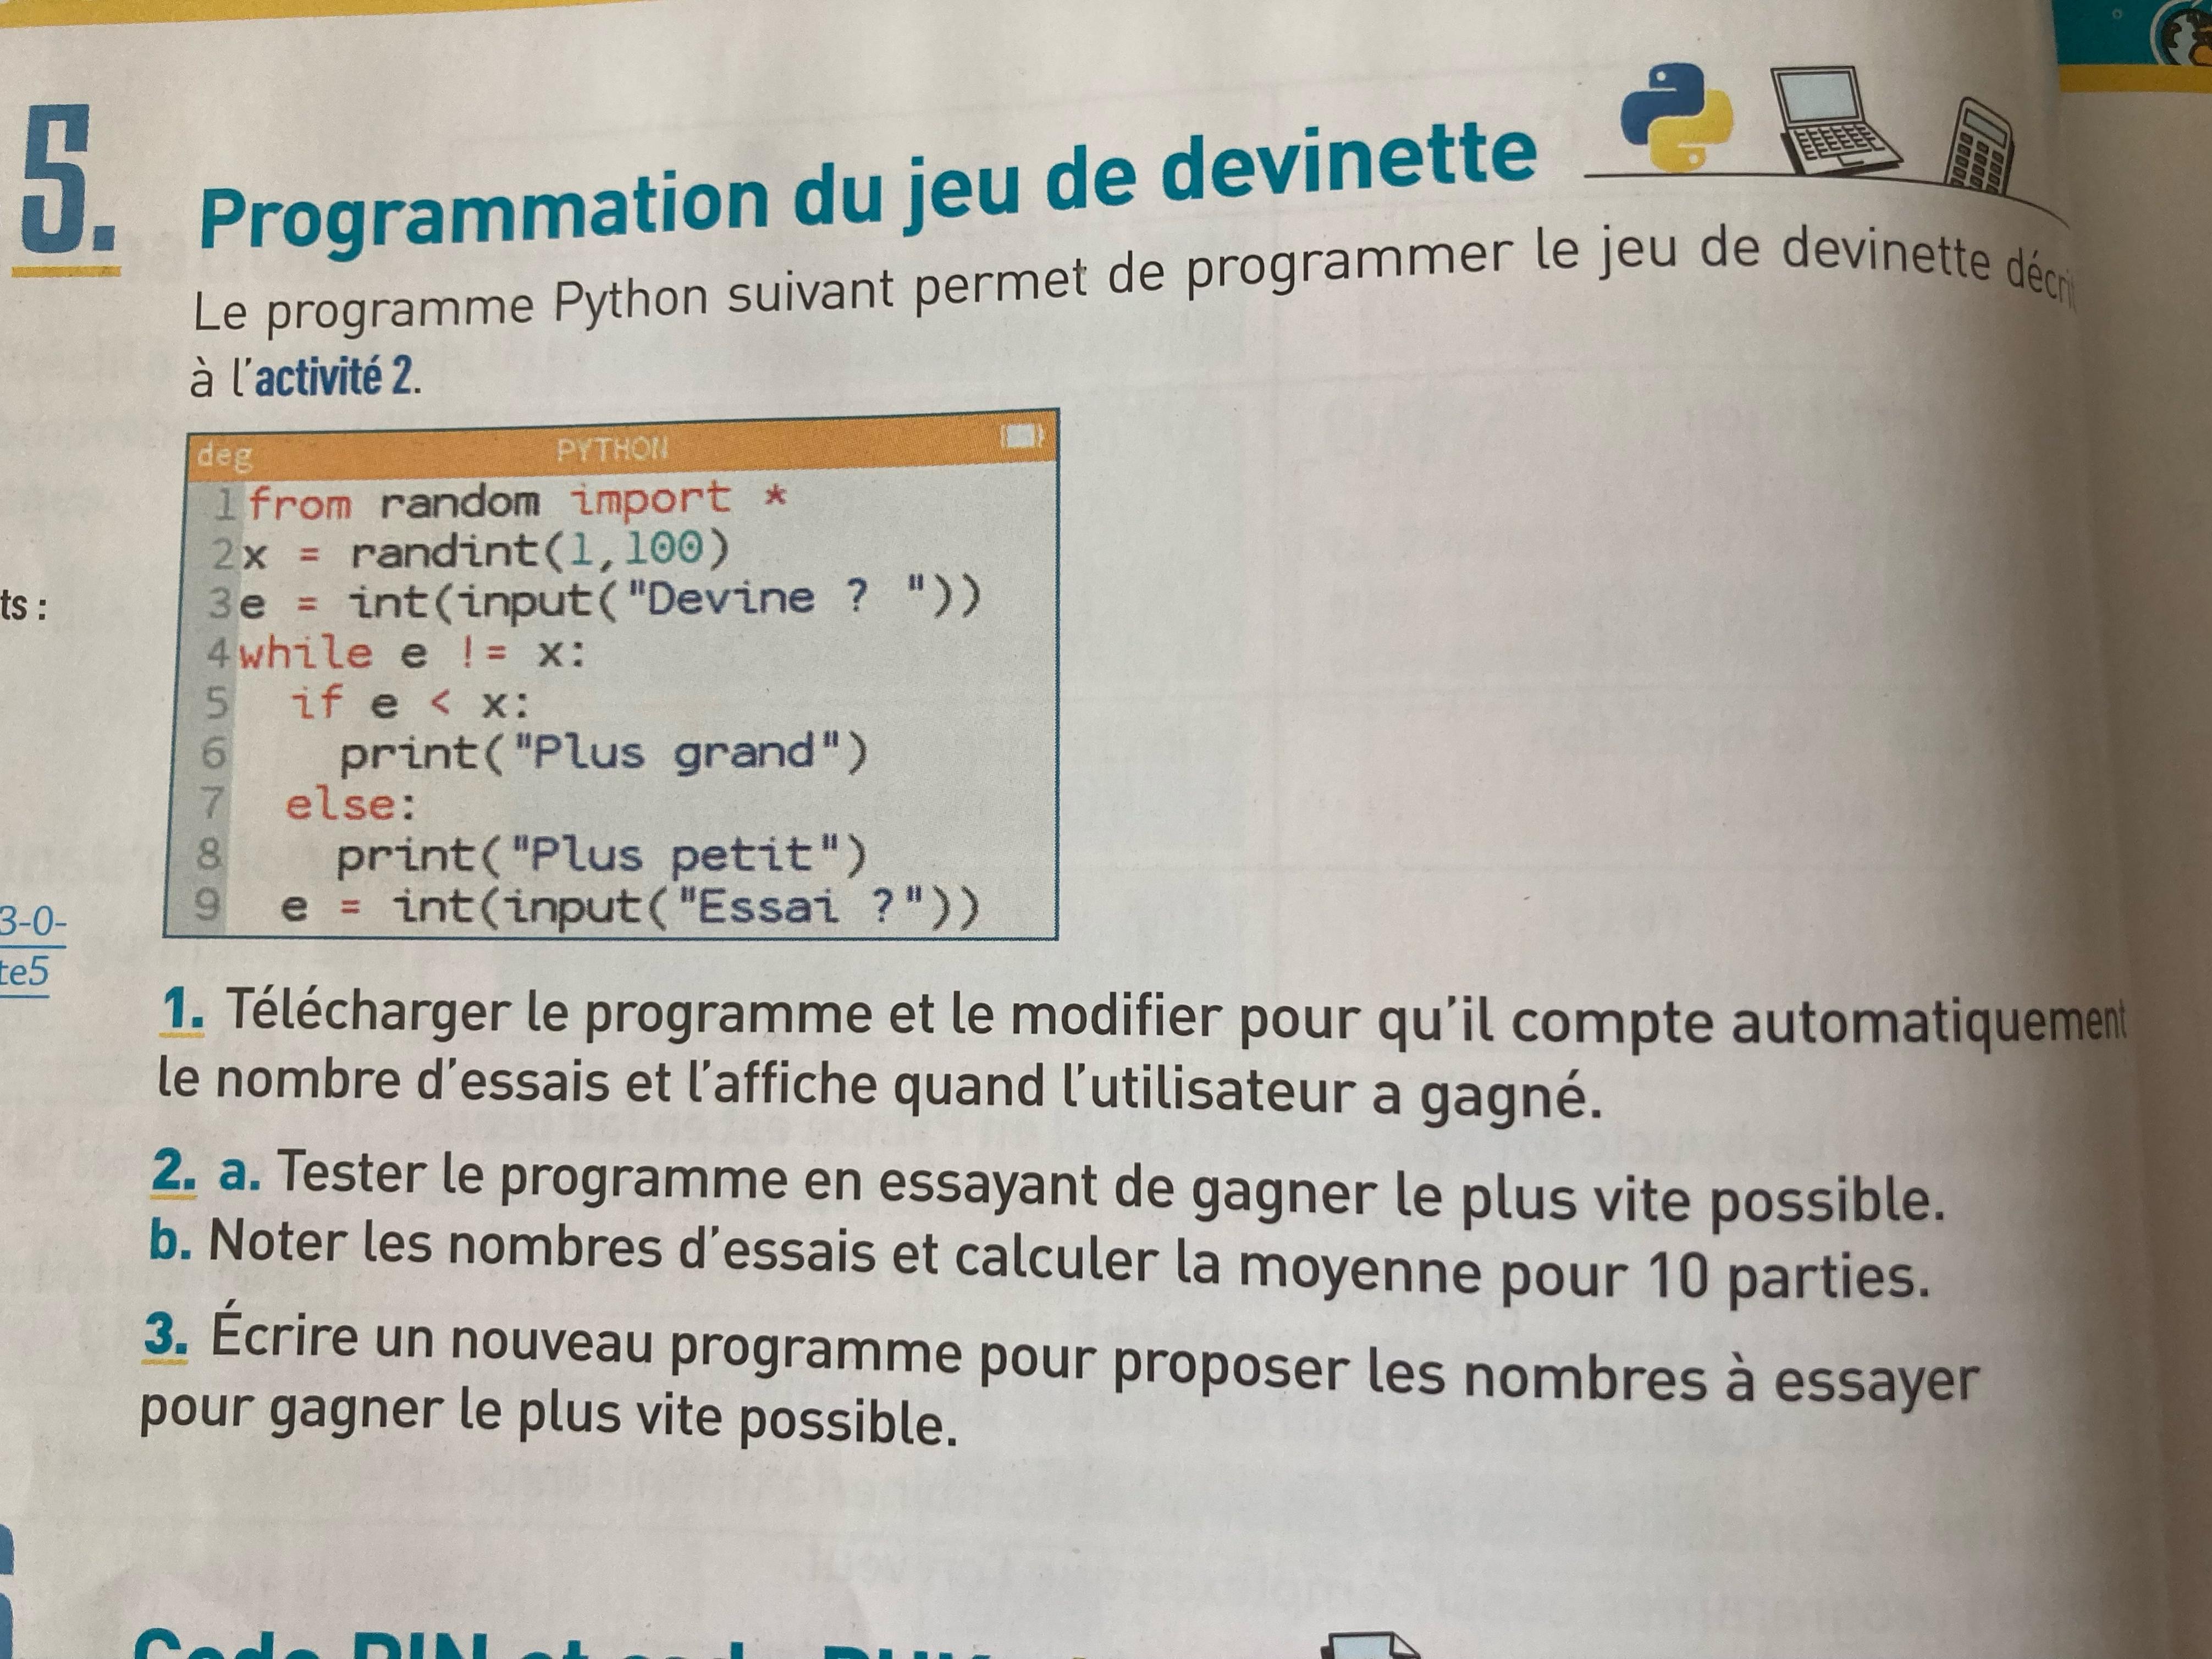 Nom : Enonc Python.jpg
Affichages : 246
Taille : 1,13 Mo